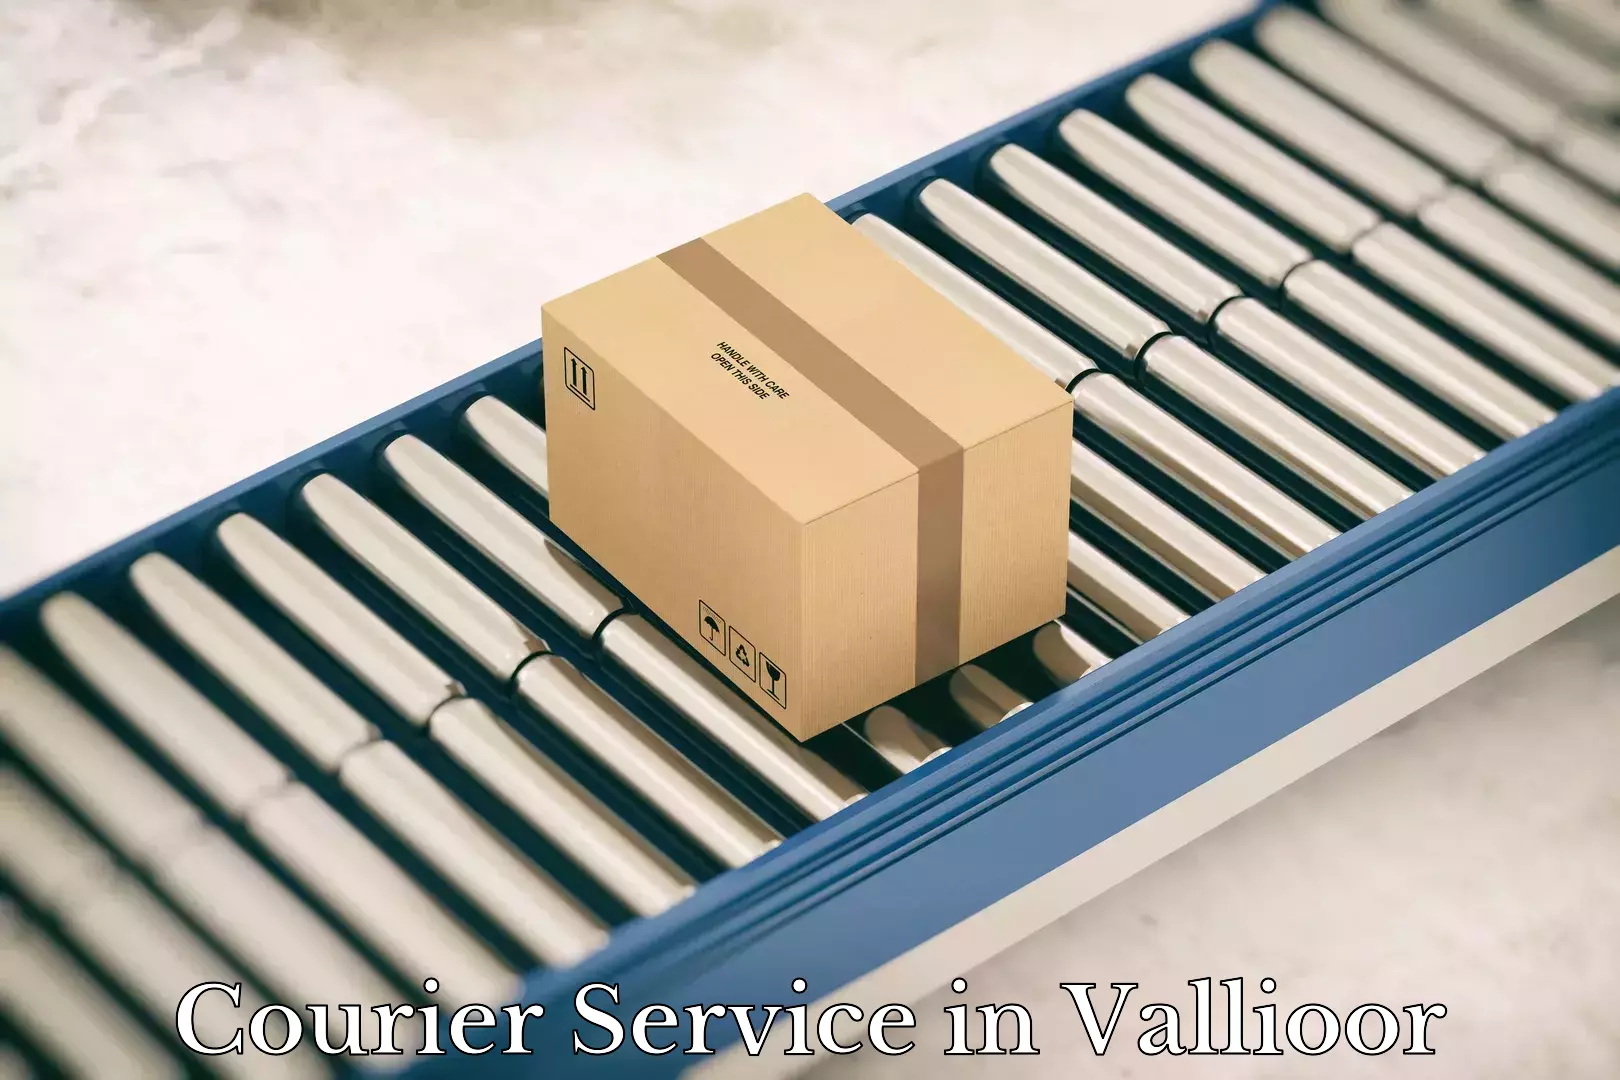 24/7 shipping services in Vallioor